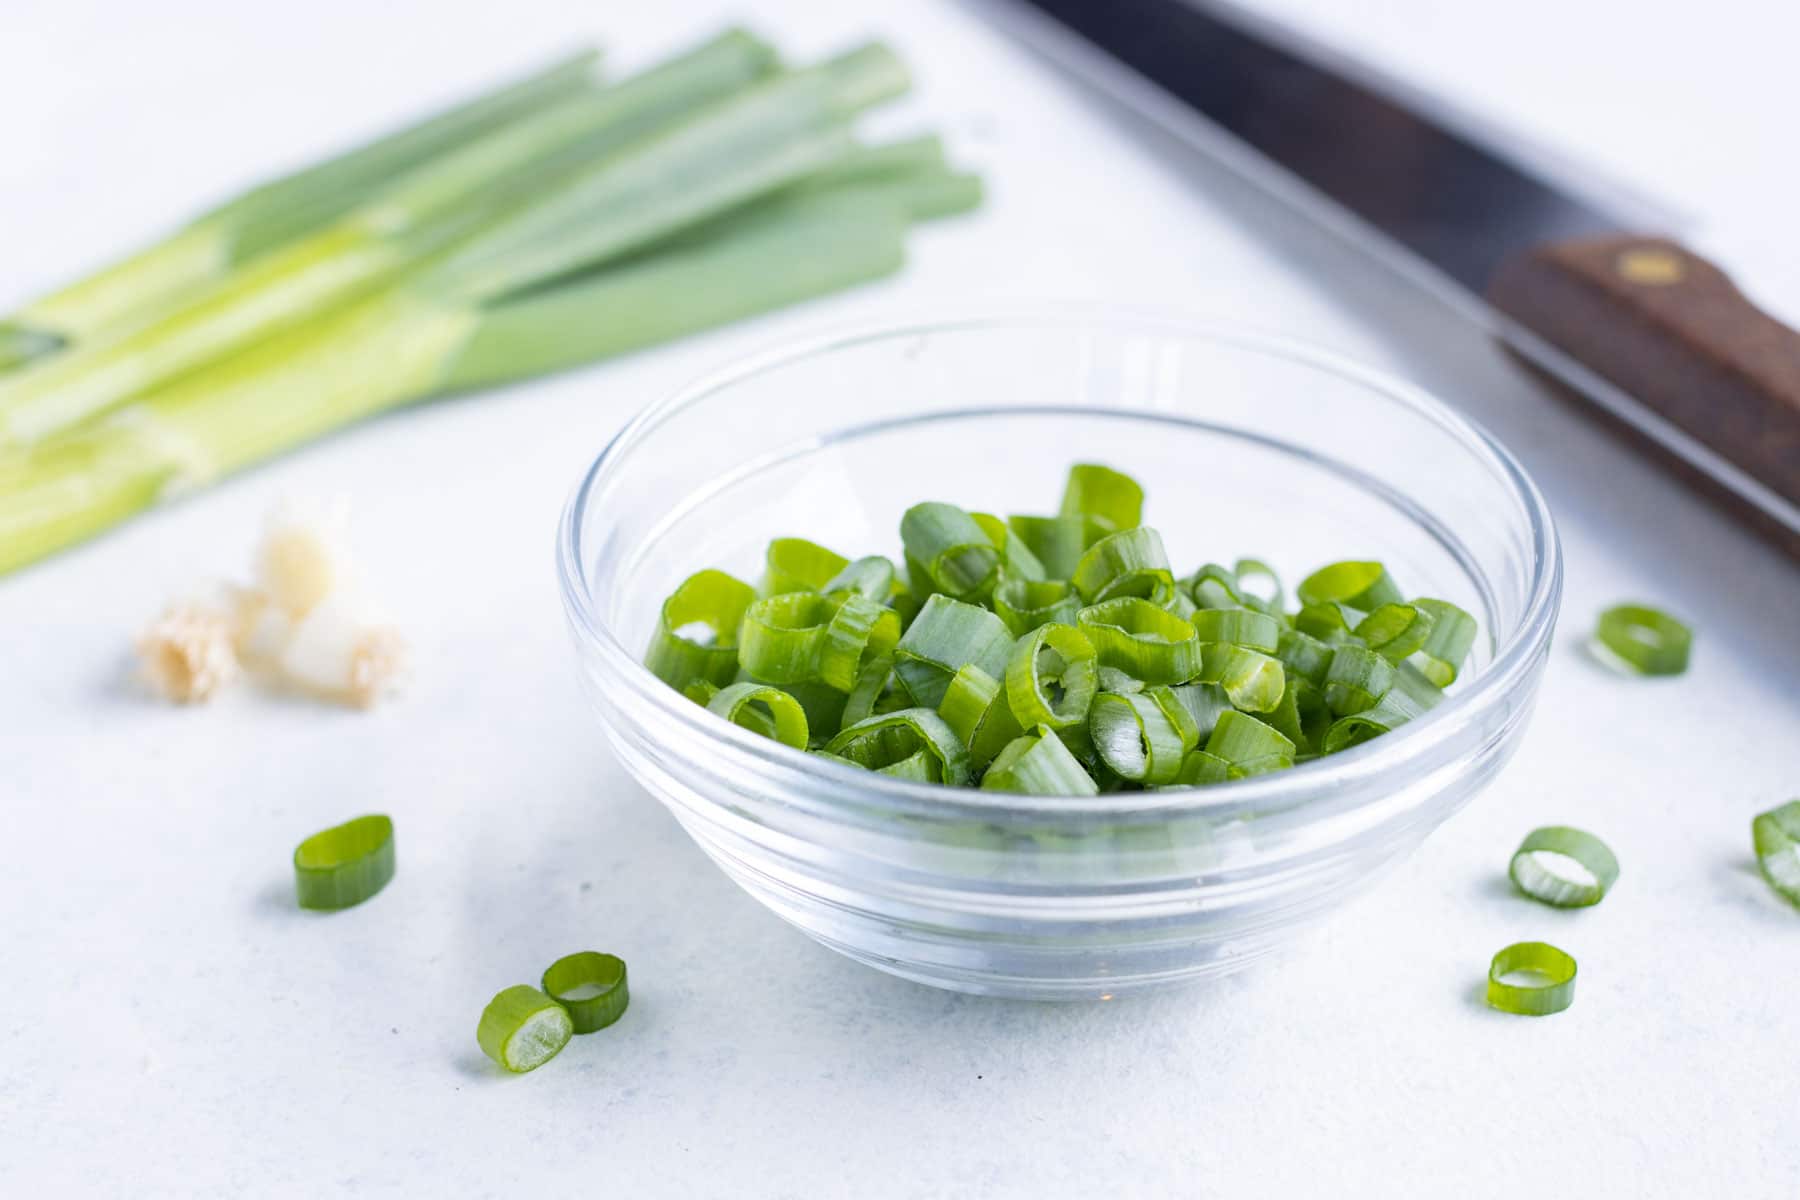 How to Slice Green Onions, Scallions and Spring Onions - always use butter